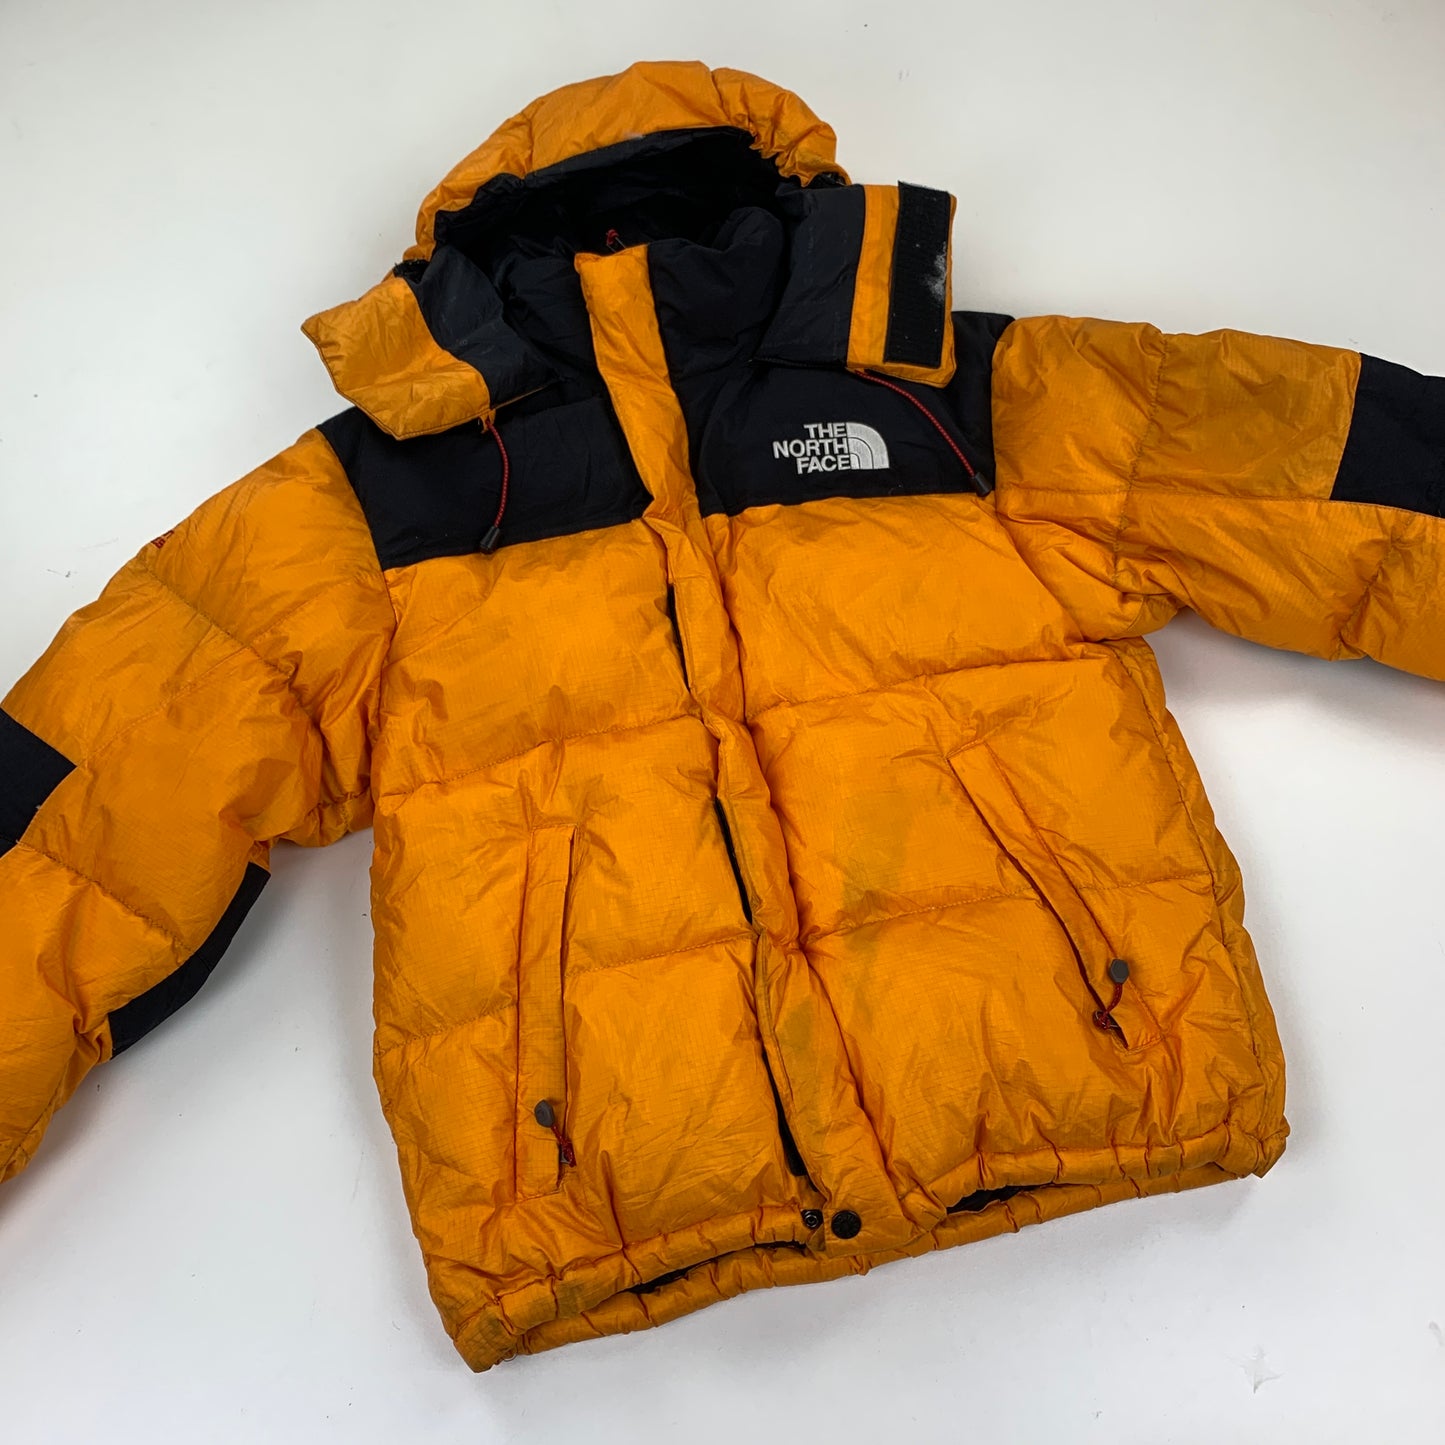 The North Face 700 Baltoro Windstopper Puffer Jacket-pufferseason-1996-winter-secondhand-austria-vintage-sustainable-pre-owned-deal-sale-nuptse-puffer-down-coat